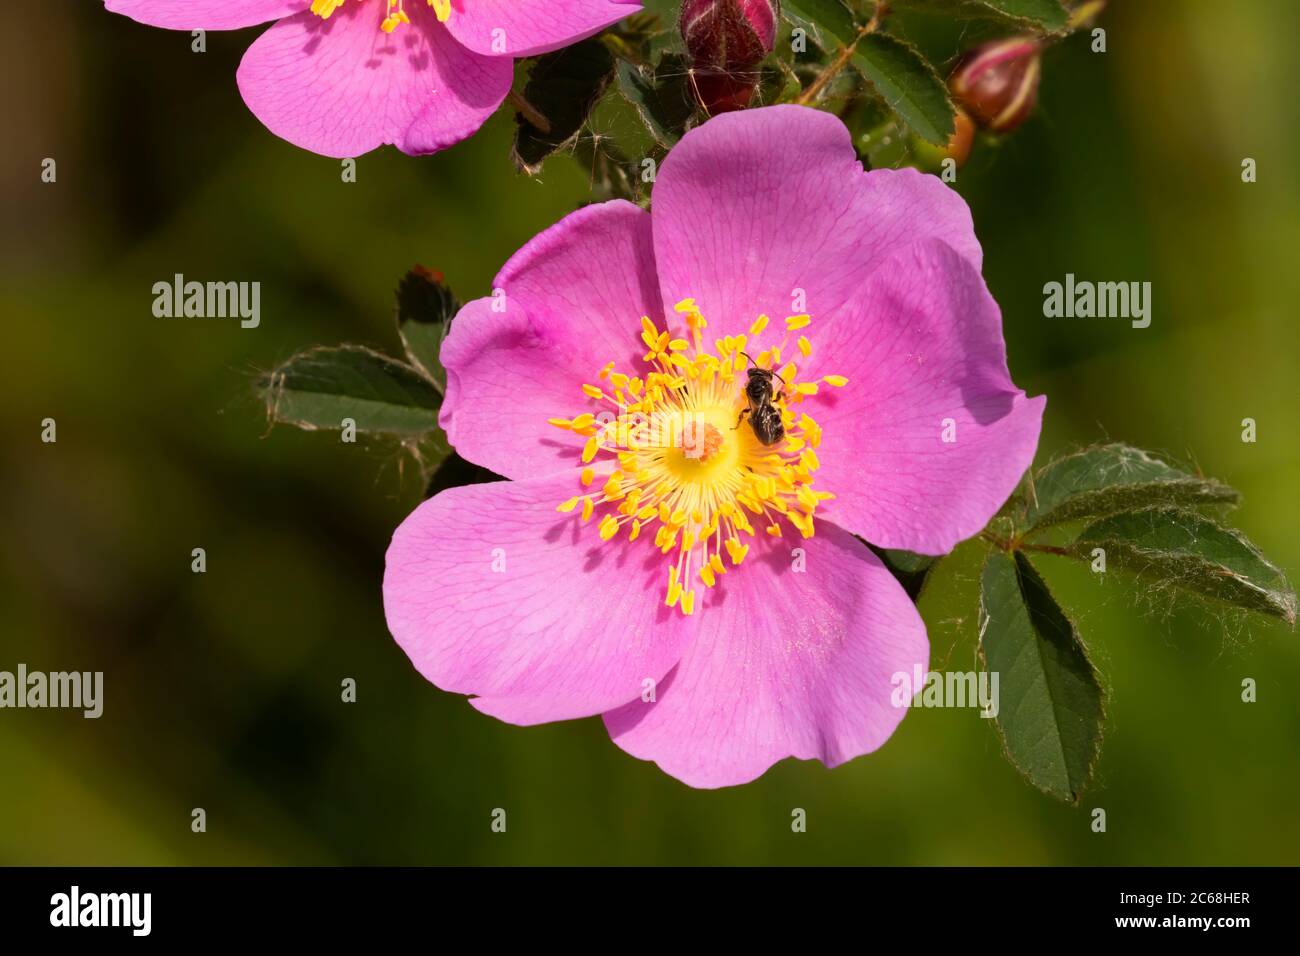 Wild rose with native bee, Willow Lake Wastewater Pollution Control Facility, Keizer, Oregon Stock Photo